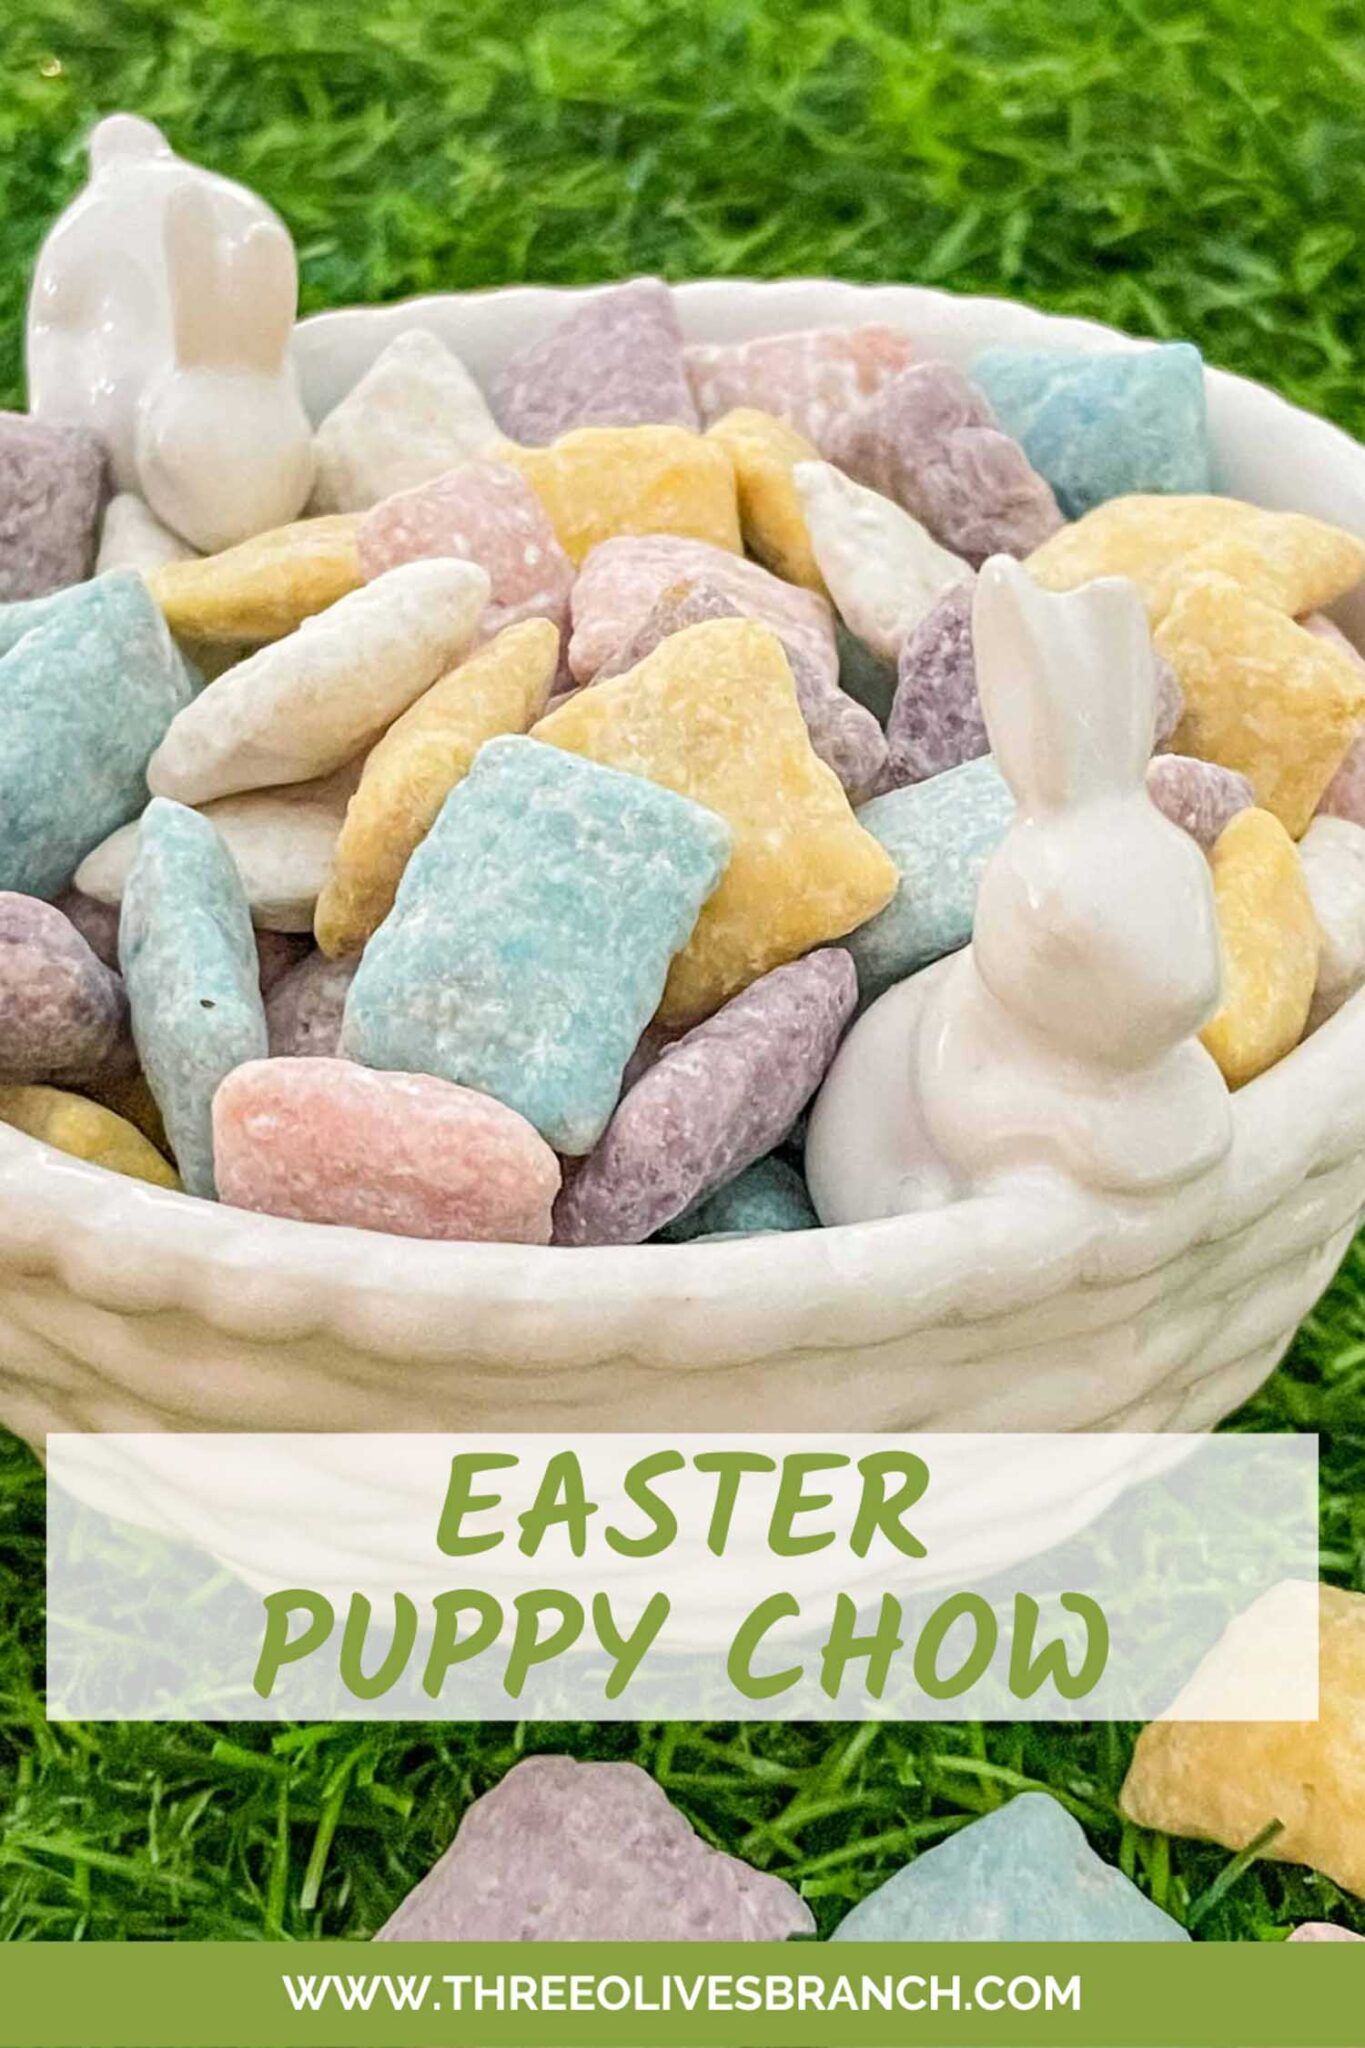 Easter Puppy Chow - Three Olives Branch